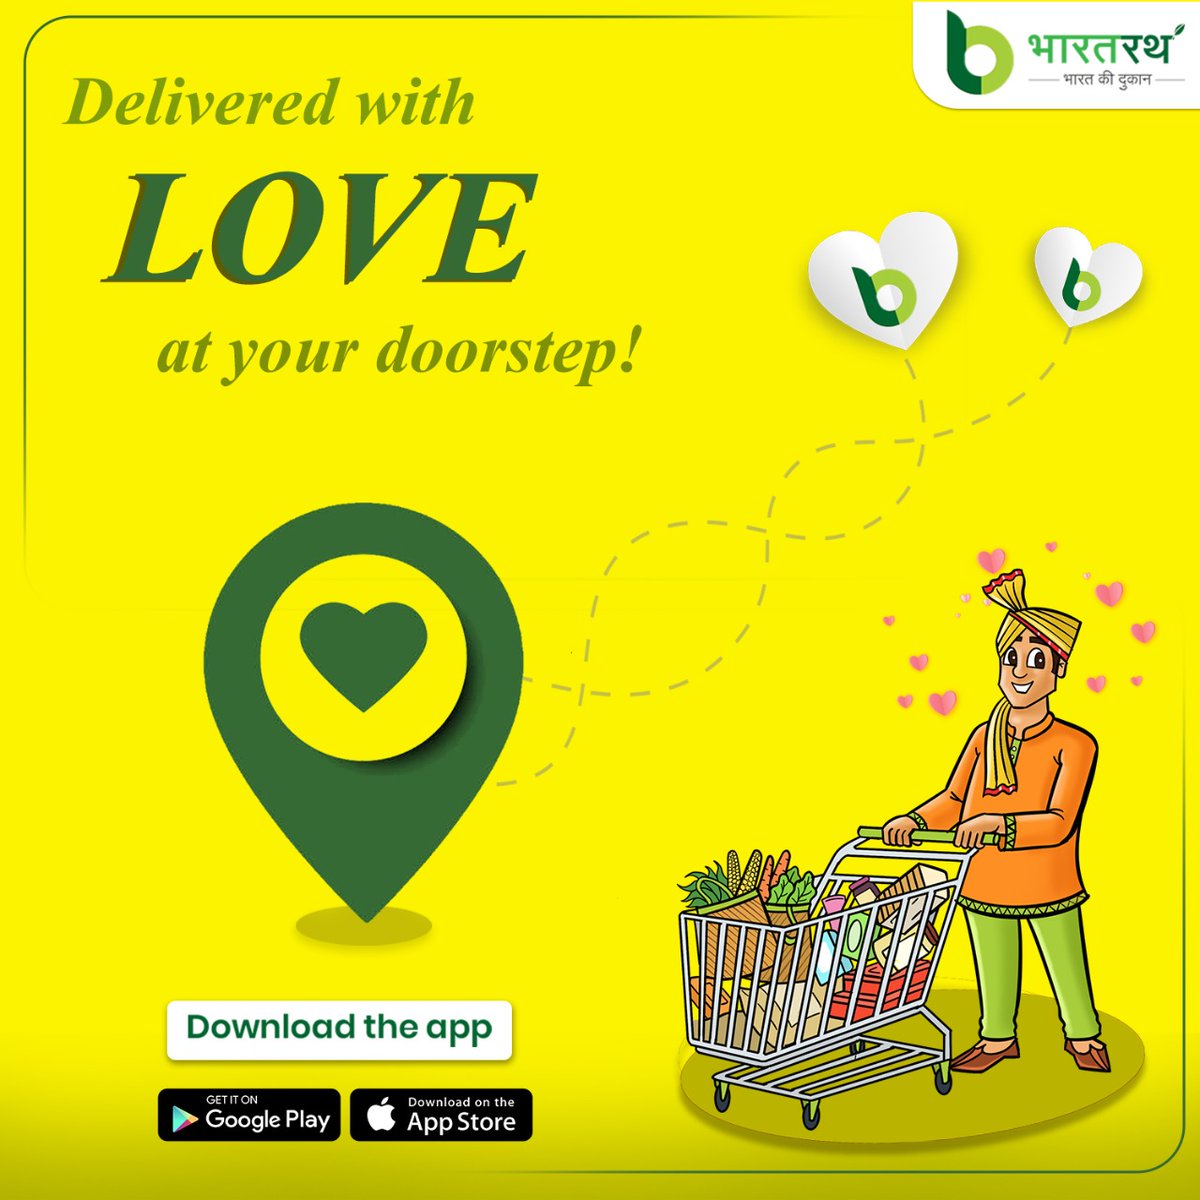 Order for fresh, authentic and nutritious grocery online. Download the Bharatrath app right away! #OnlineGrocery #Organic #HealthyGrocery #Bharatrath